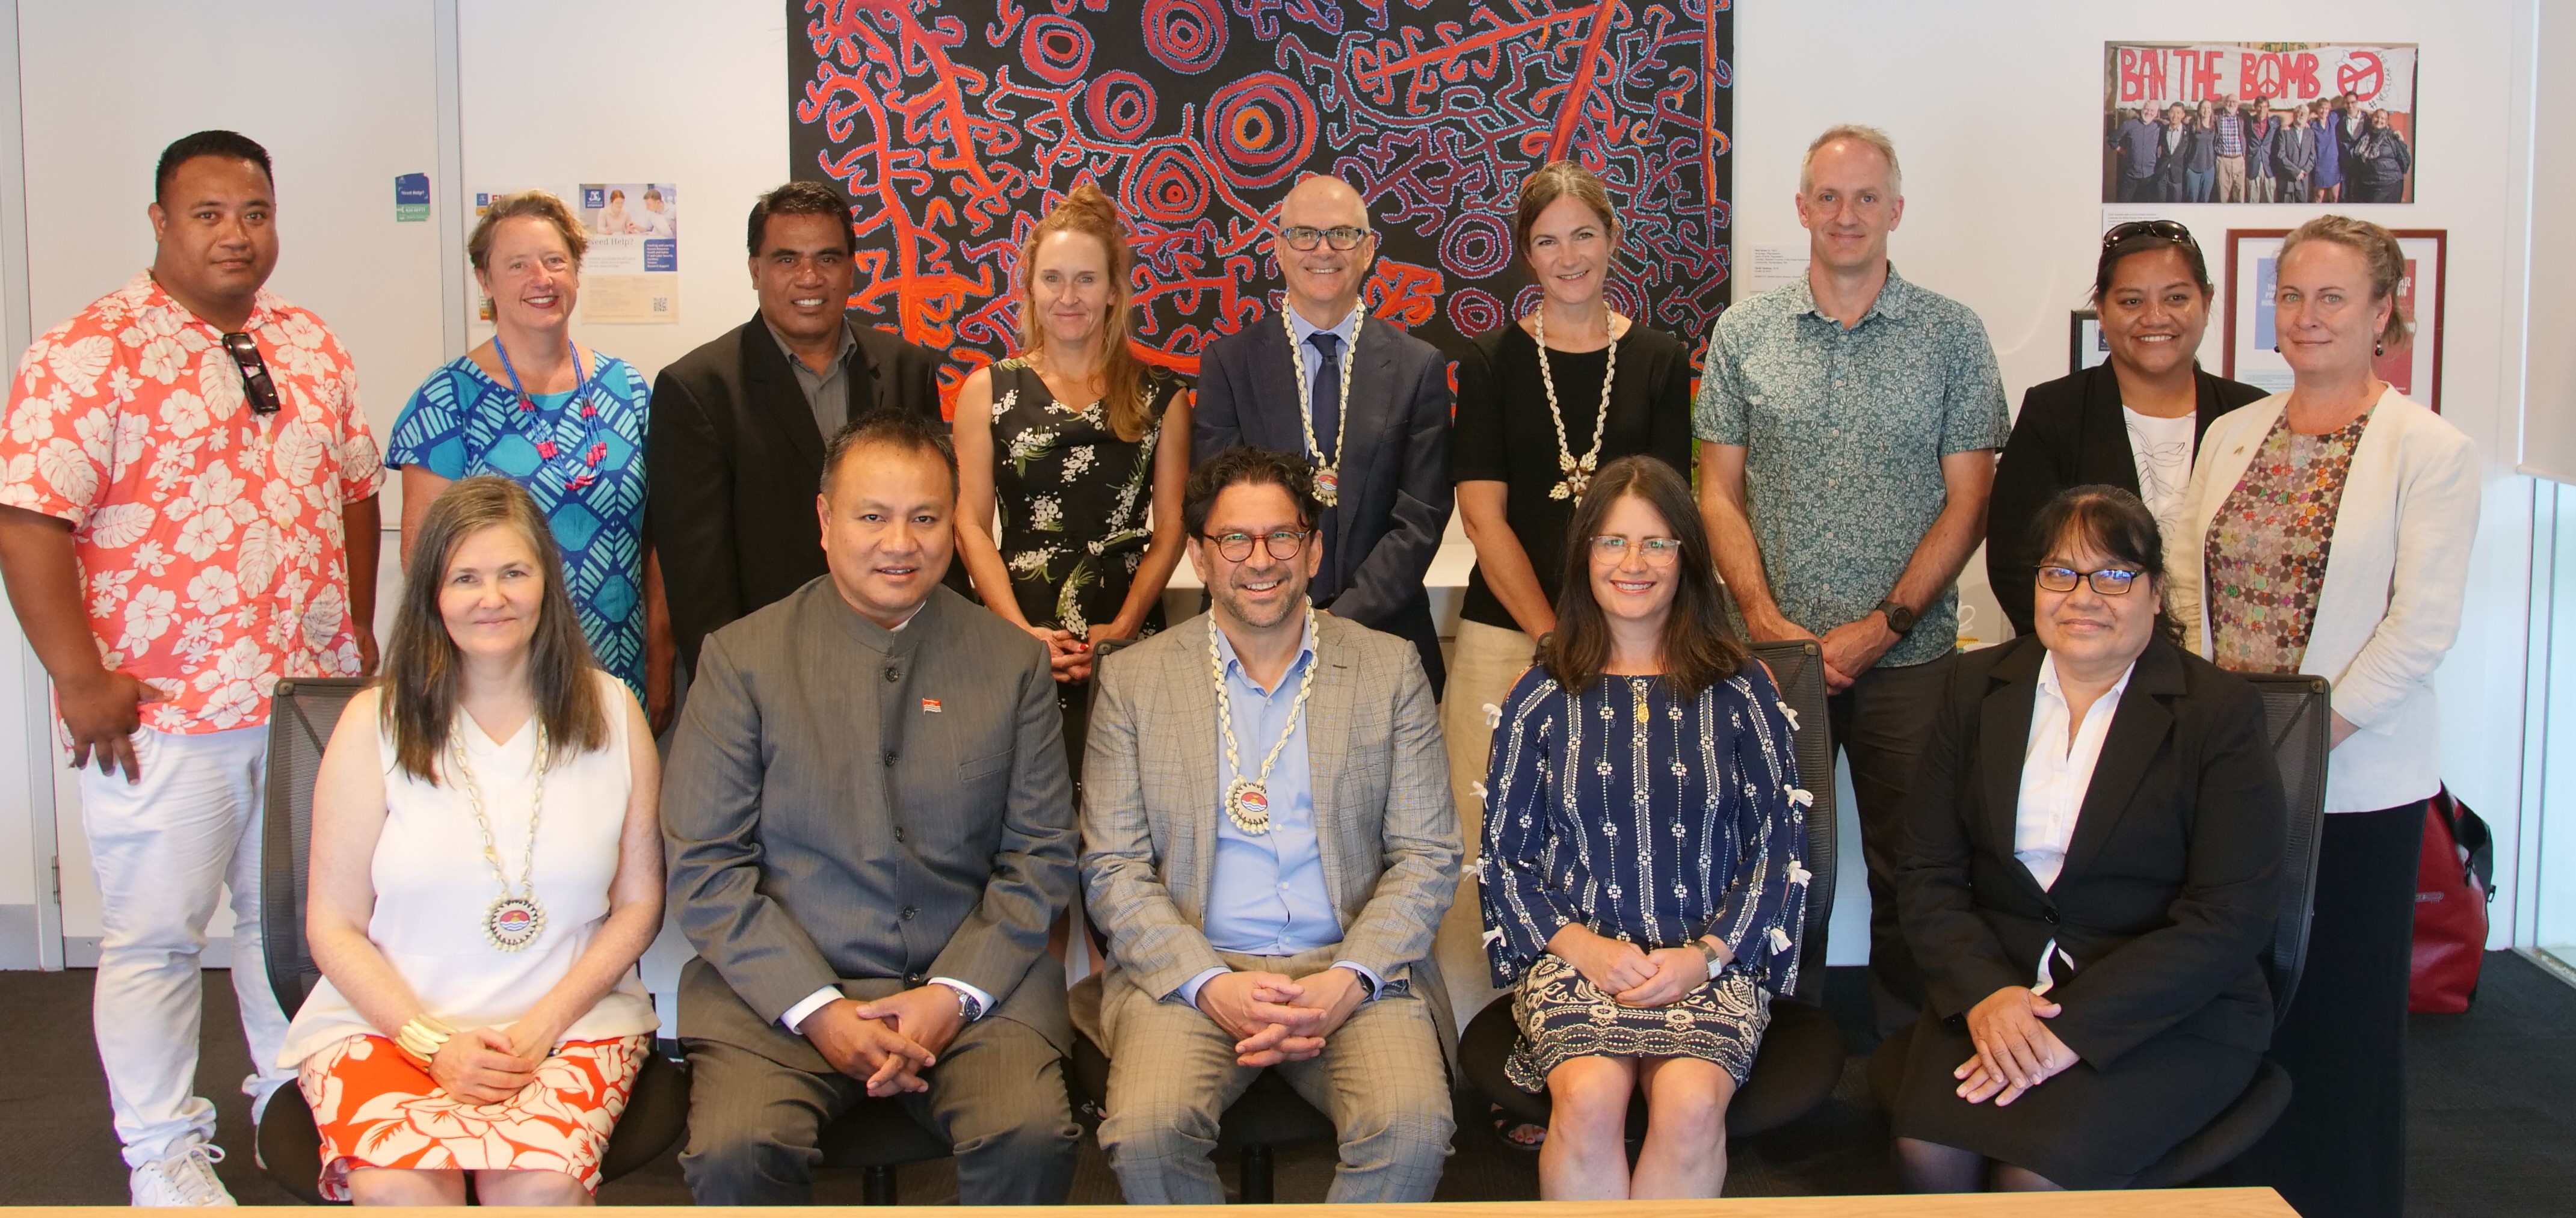 Delegation from the government of Kiribati and leadership of the University of Melbourne.